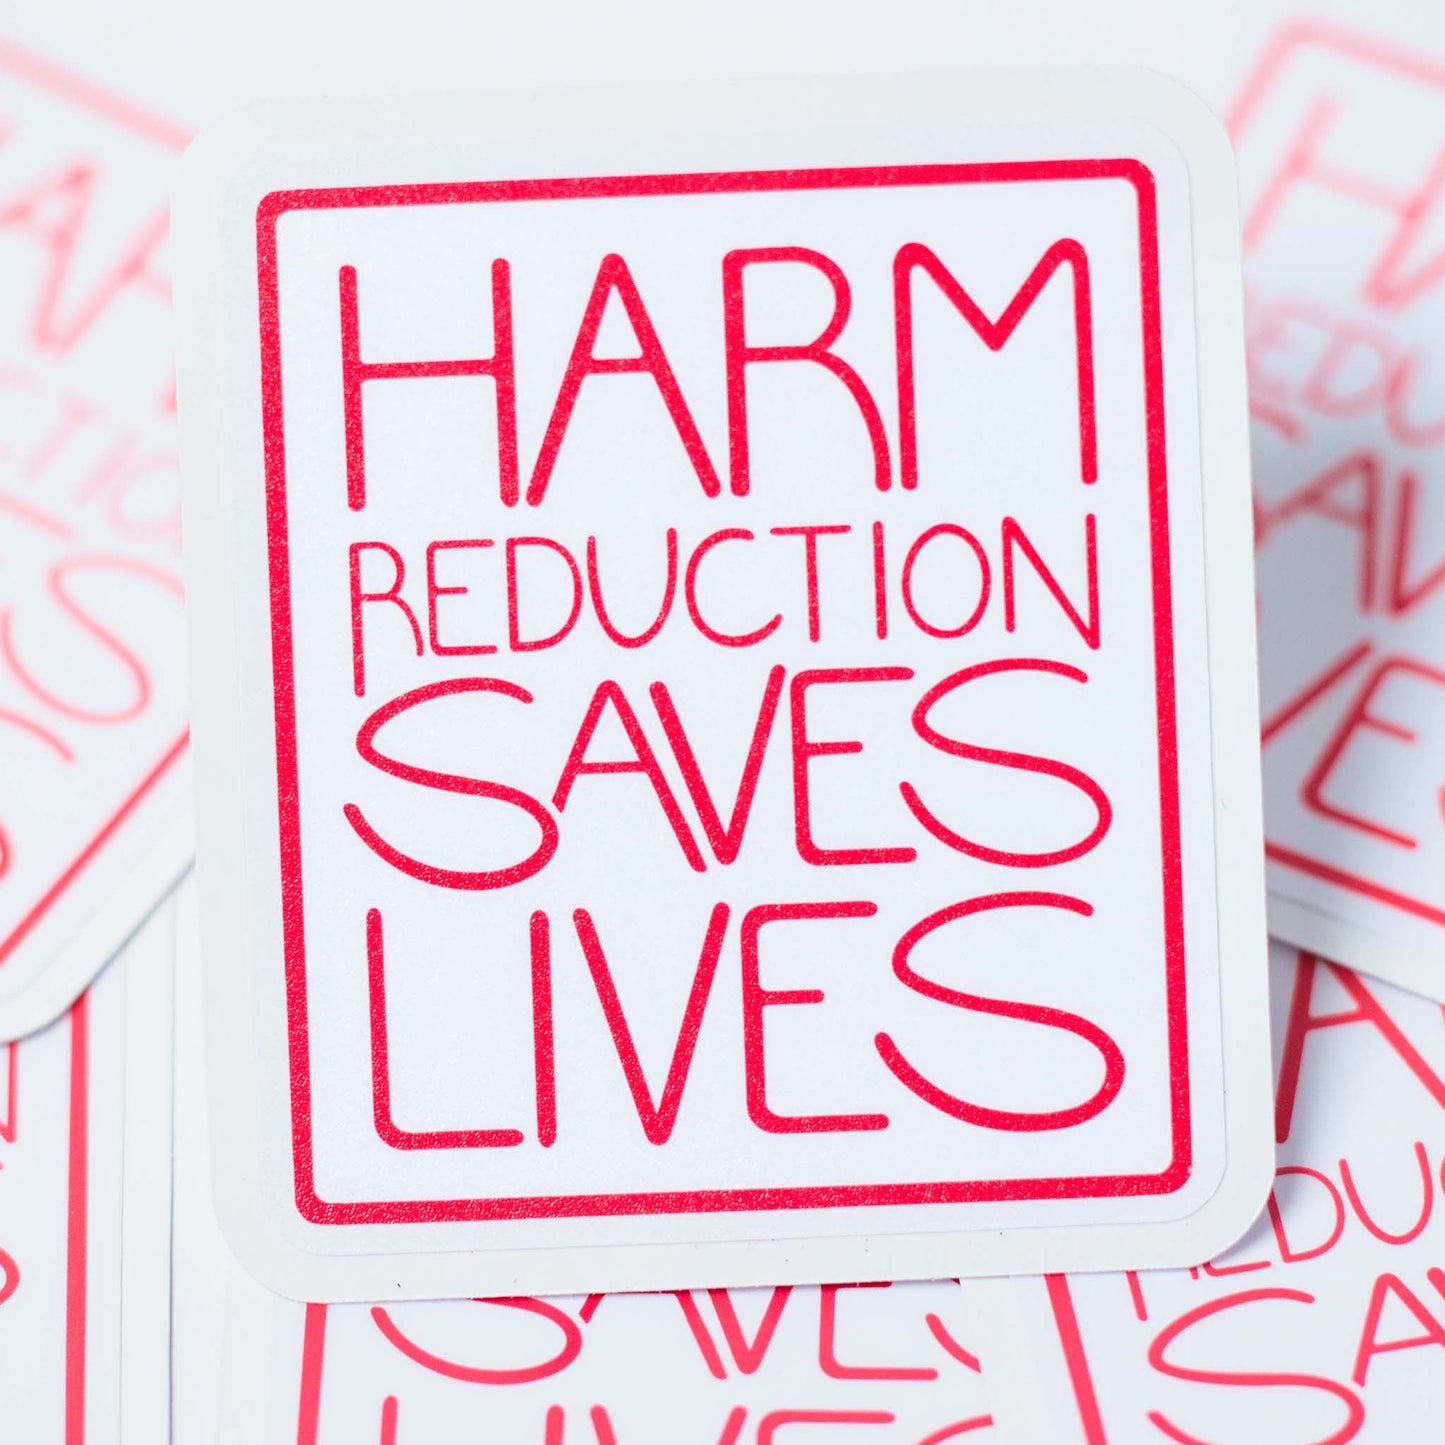 Harm Reduction Saves Lives